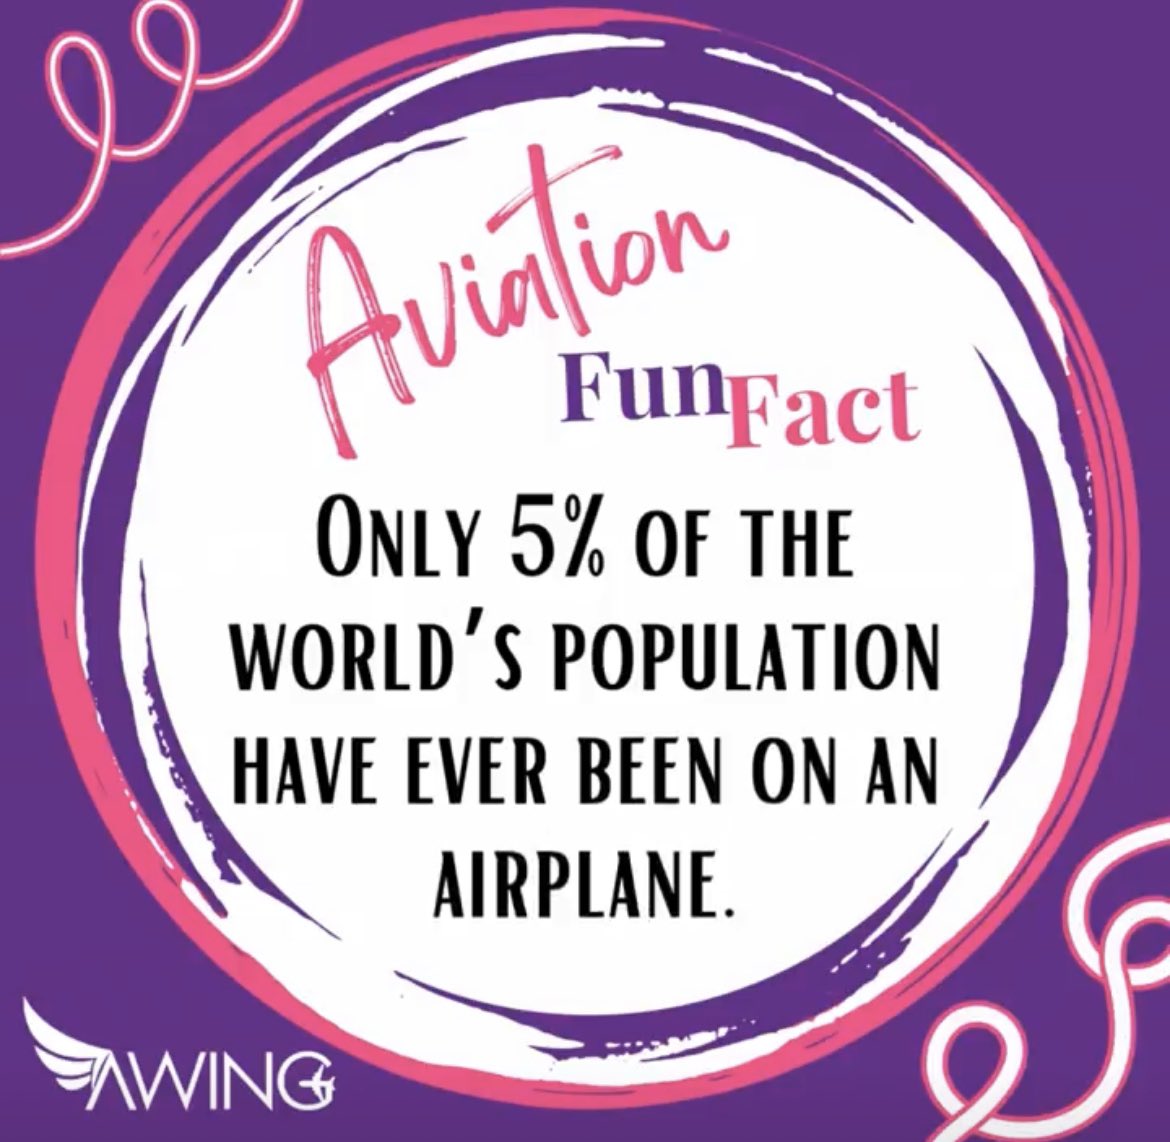 #TGIF to our #Aviation friends around the world!  It's FRIDAY and you know what that means, a new #FunFact that you can use to WOW and IMPRESS your friends and family this weekend!

#WomenInAviation #DEI #25by25 #AviationIndustry